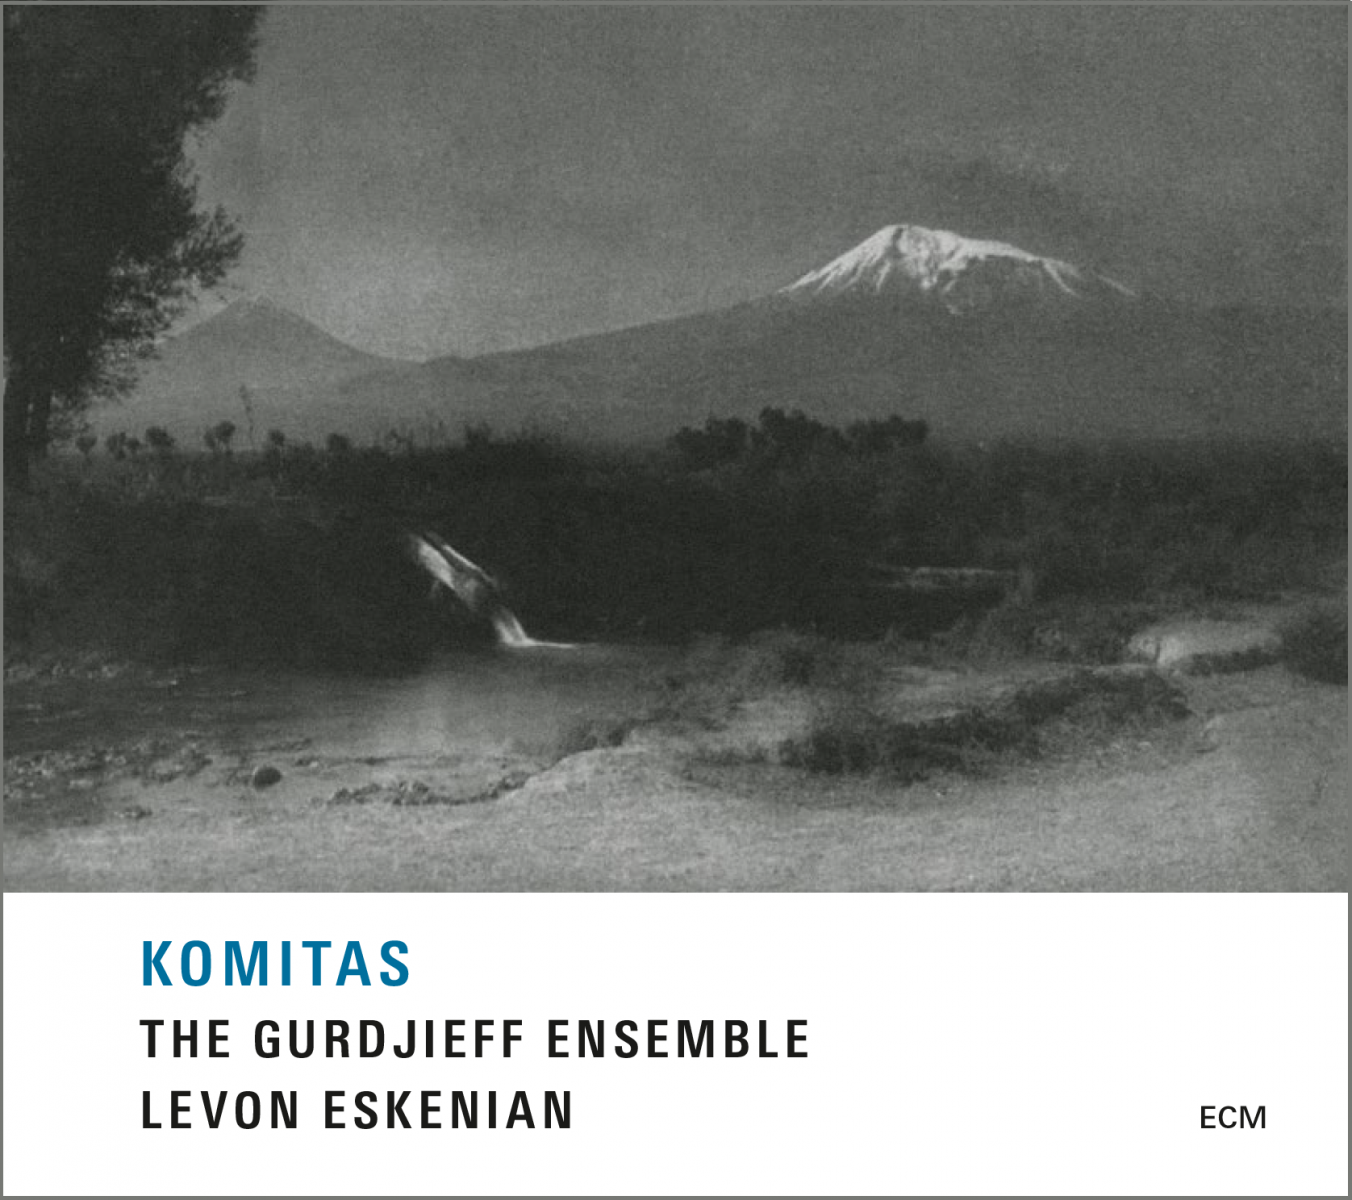 There is a growing interest in the Gurdjieff Ensemble’s 18 Komitas tracks which take back the composer’s piano pieces to their folkloric settings. “When a major recording company like ECM which is known for its selective taste releases a new CD, it is distributed all around the world and garners media attention,” says Eskenian. (Image courtesy of the Gurdjieff Ensemble)